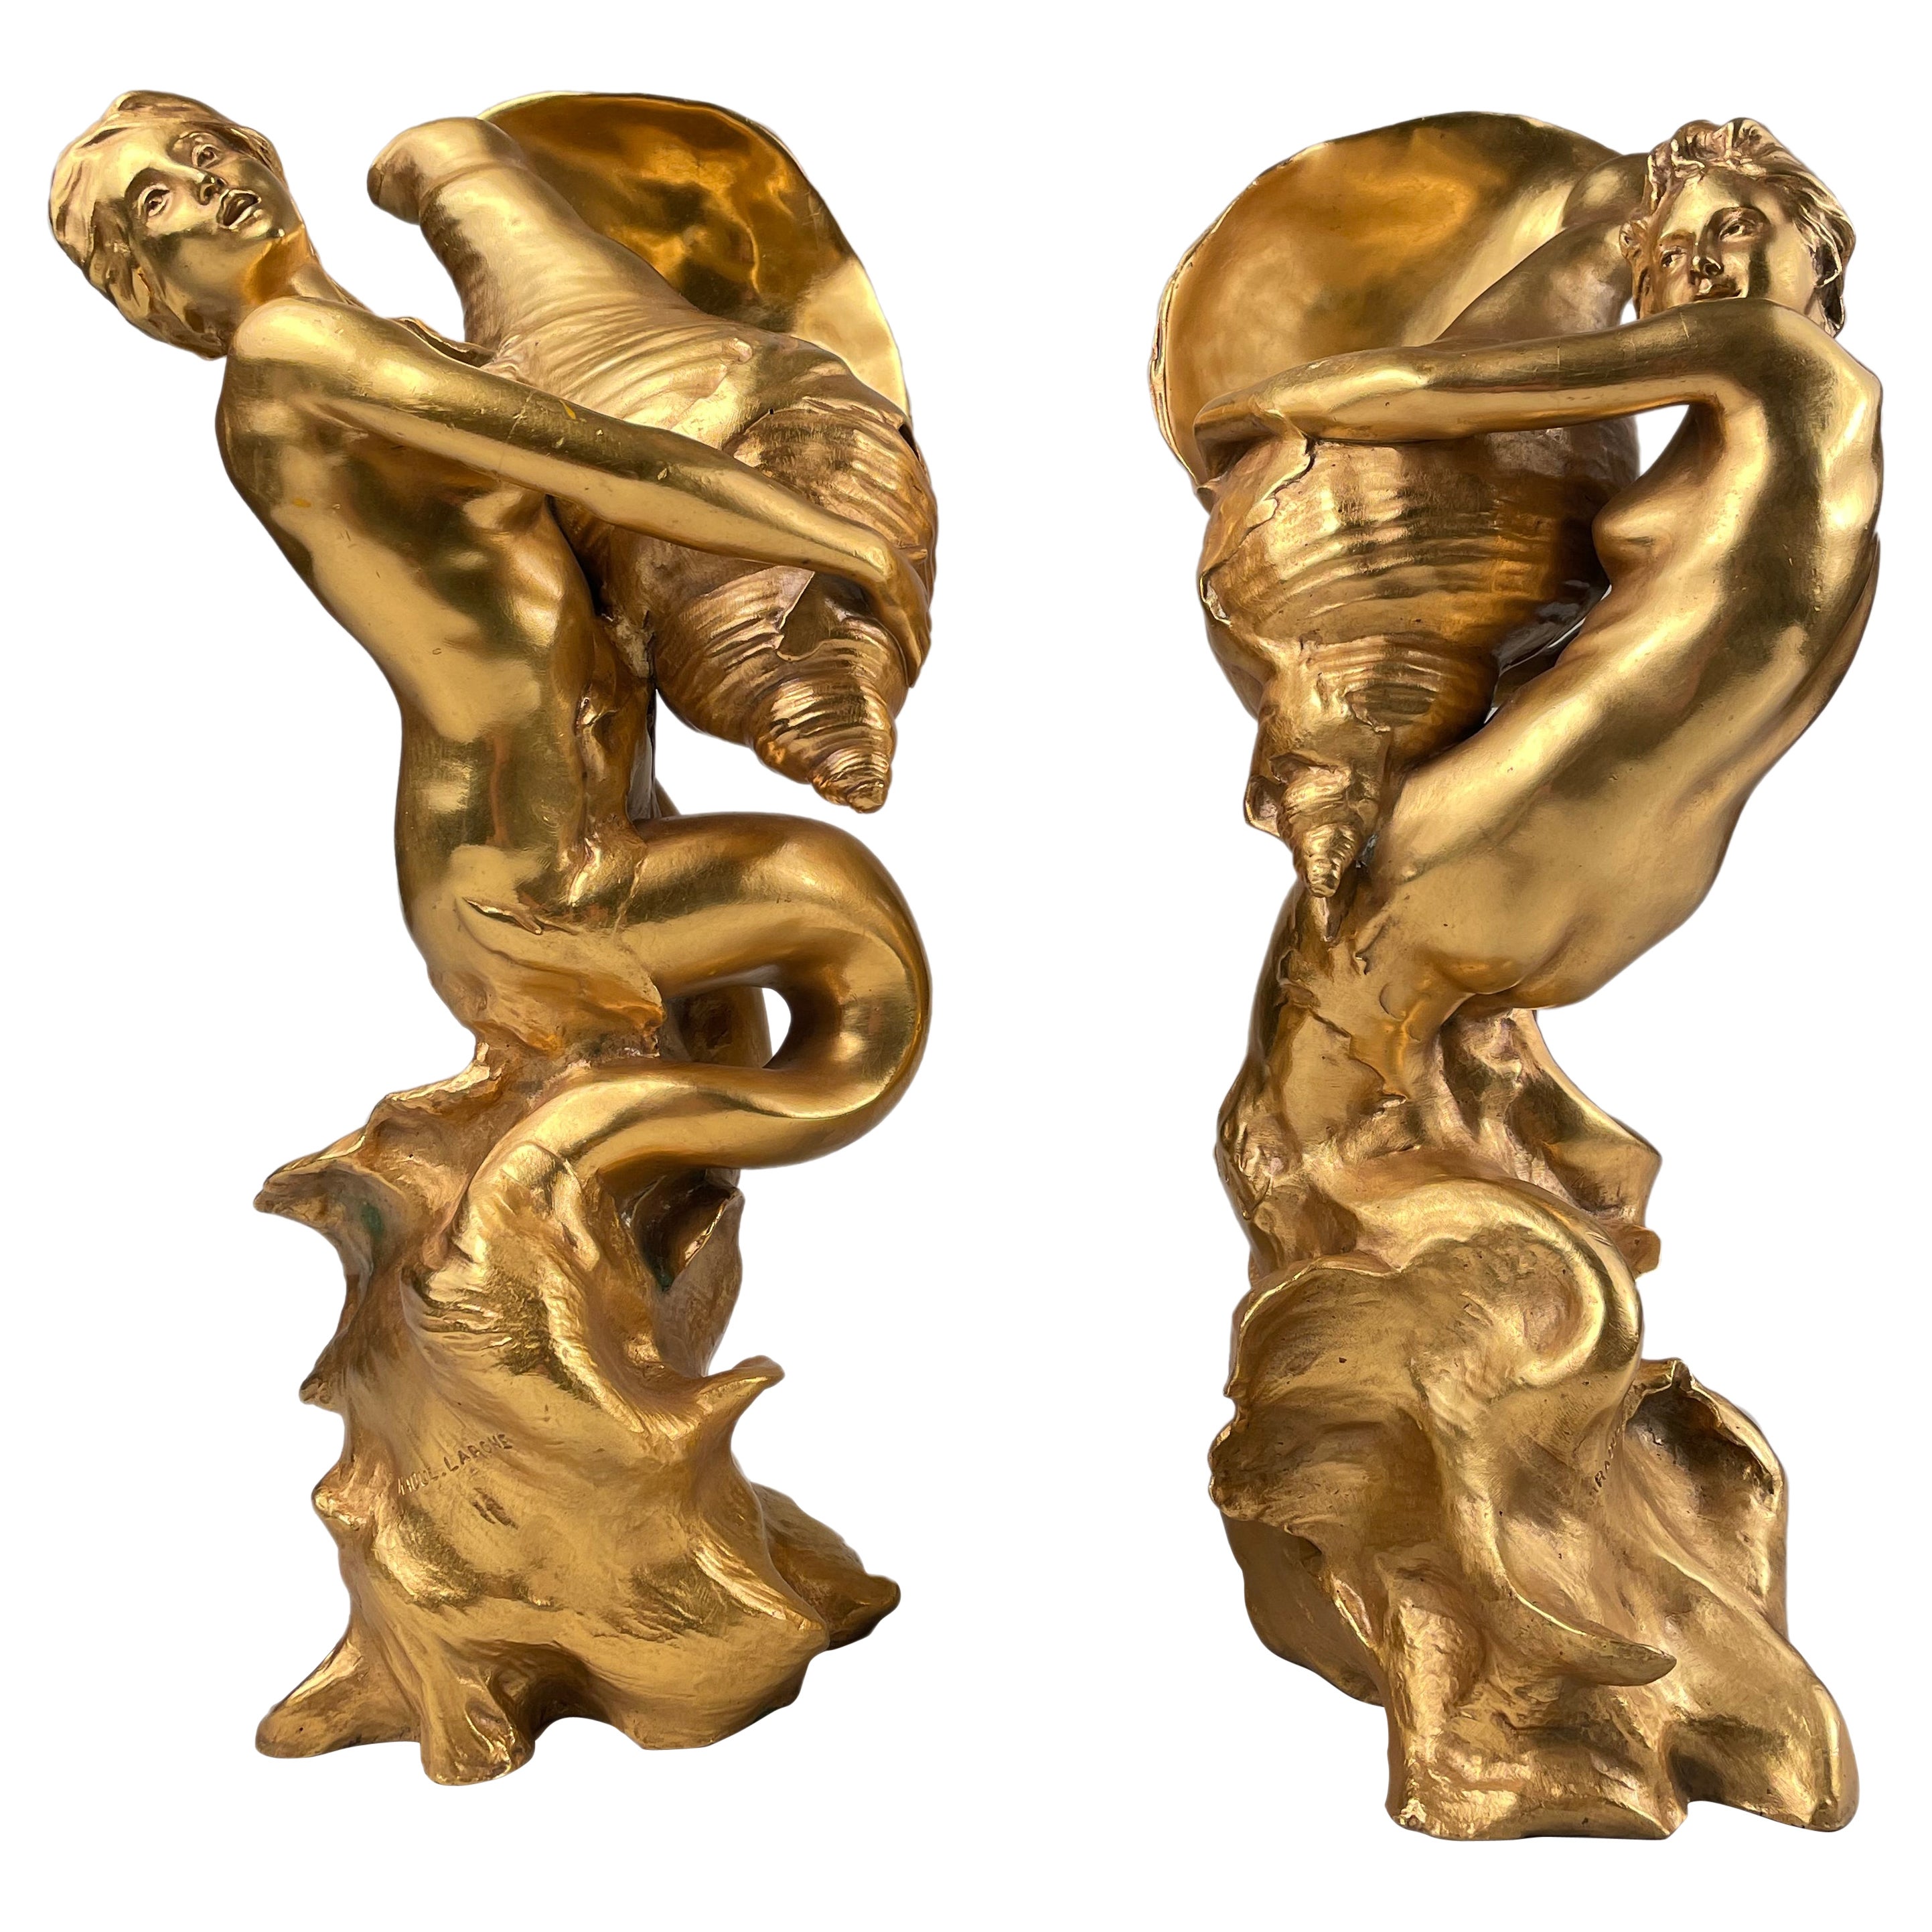 Early 20th Century French Art Nouveau "La Mer" Sculptures by, Raoul Larche For Sale